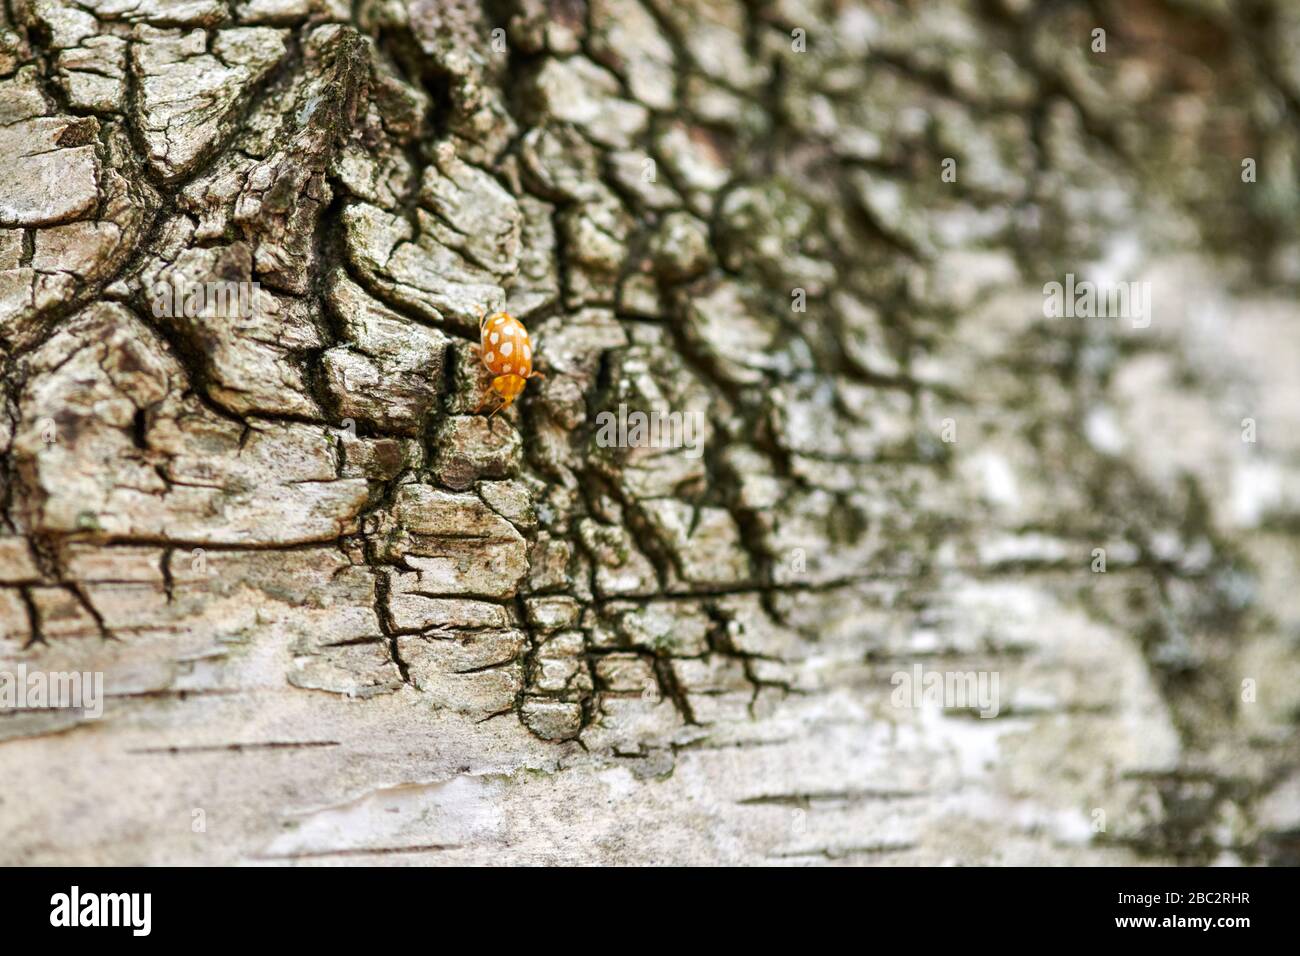 Yellow ladybug on birch tree. Little ladybird beetle, coccinellidae. Lady beetle creeping on a tree trunk in birch forest Stock Photo